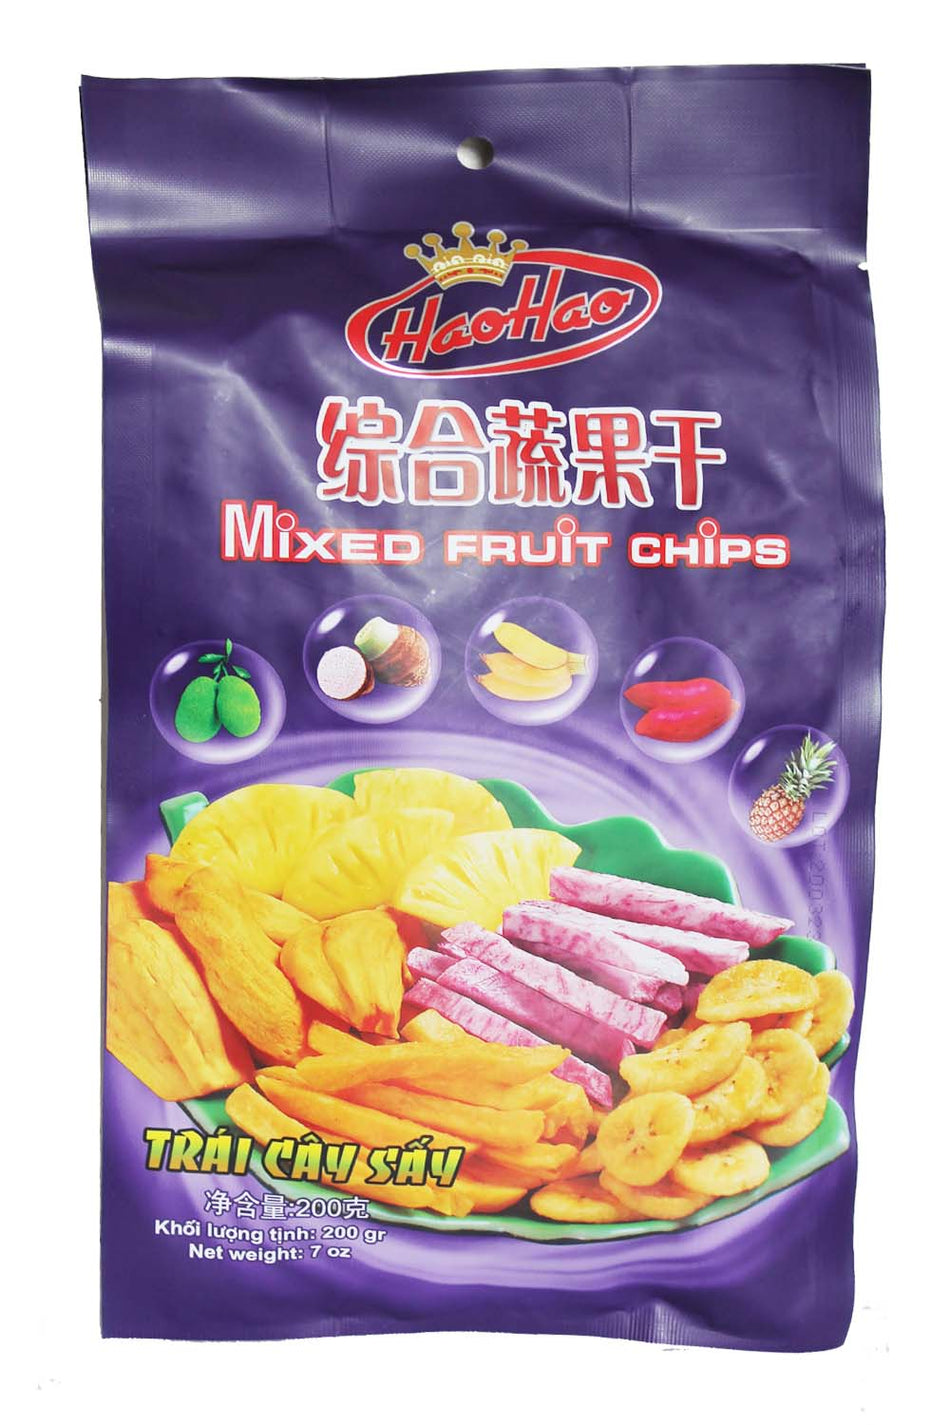 Hao Mixed Fruit Chips